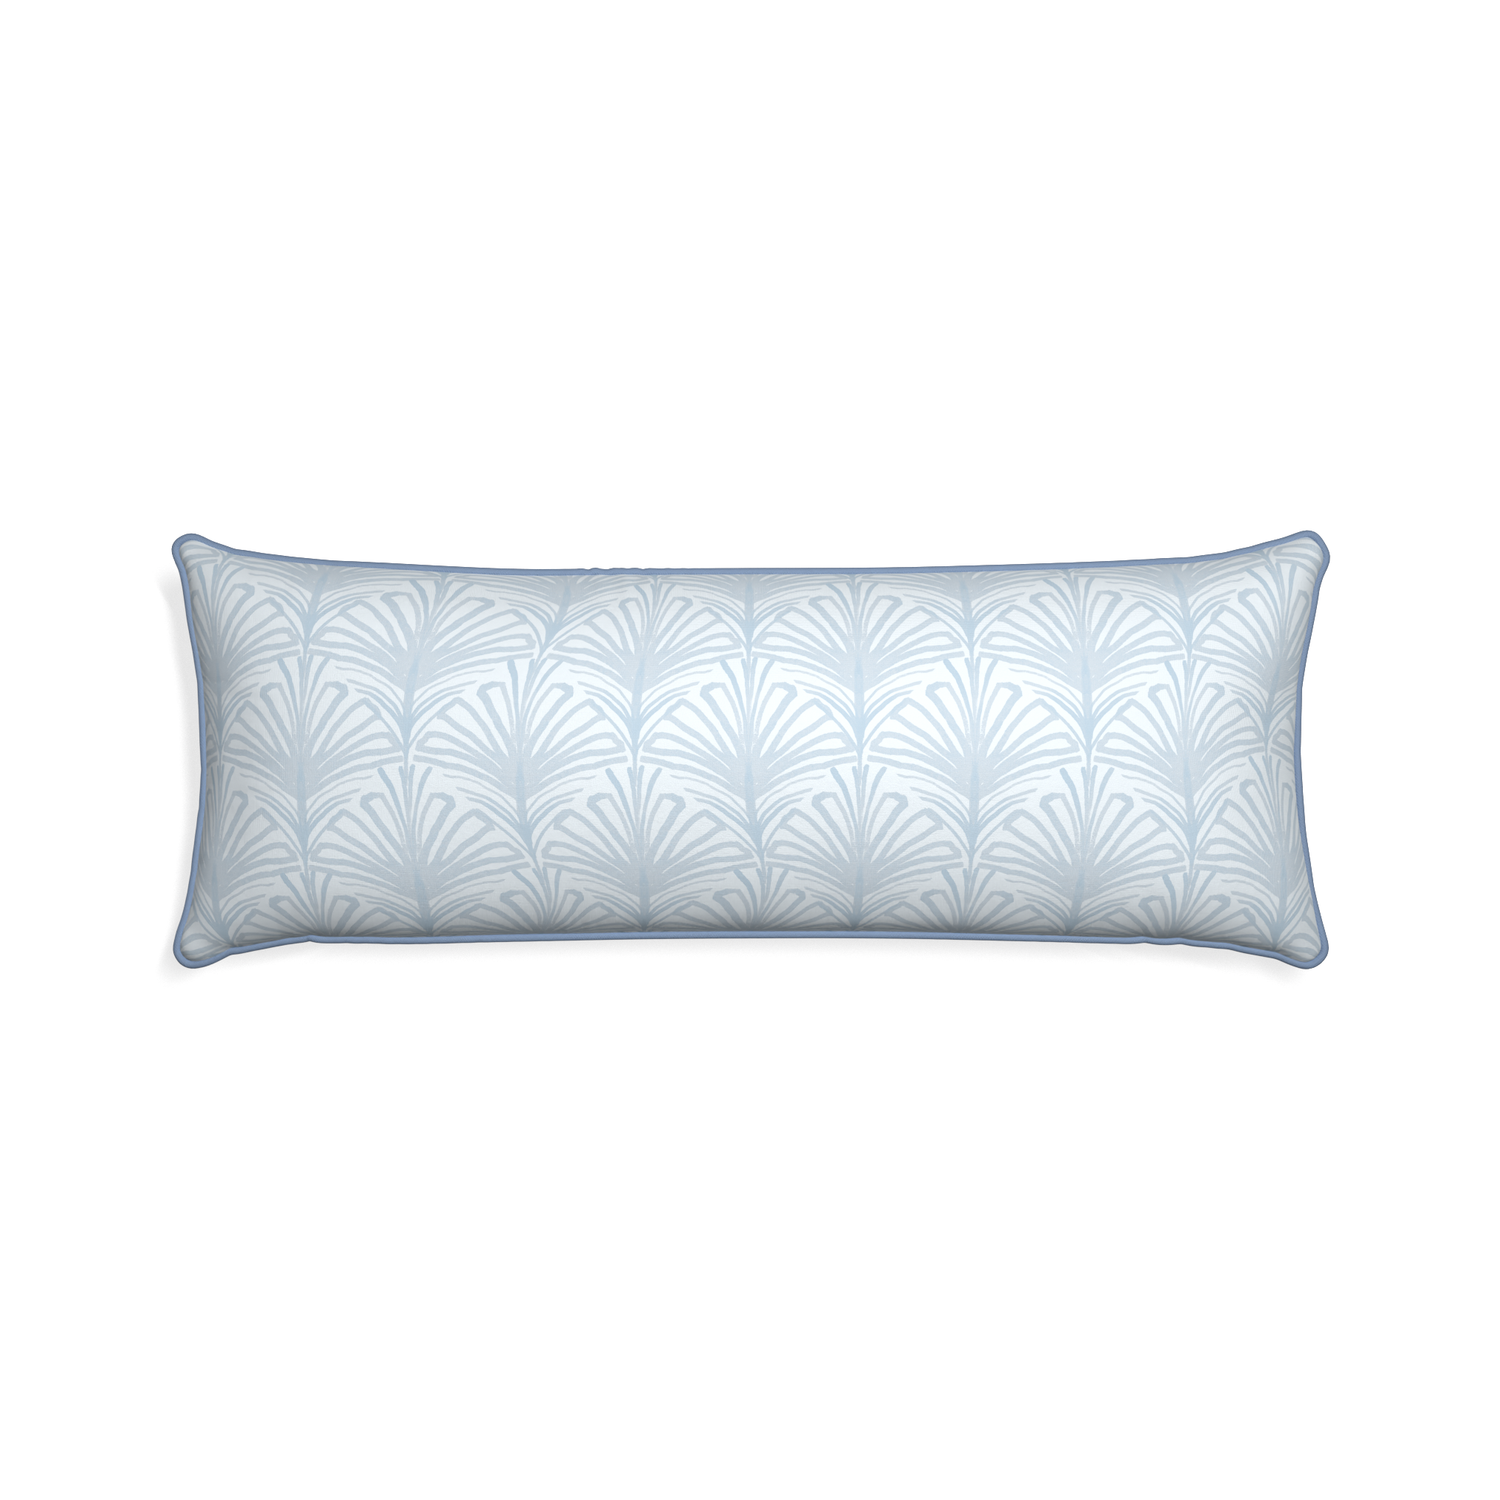 Xl-lumbar suzy sky custom pillow with sky piping on white background